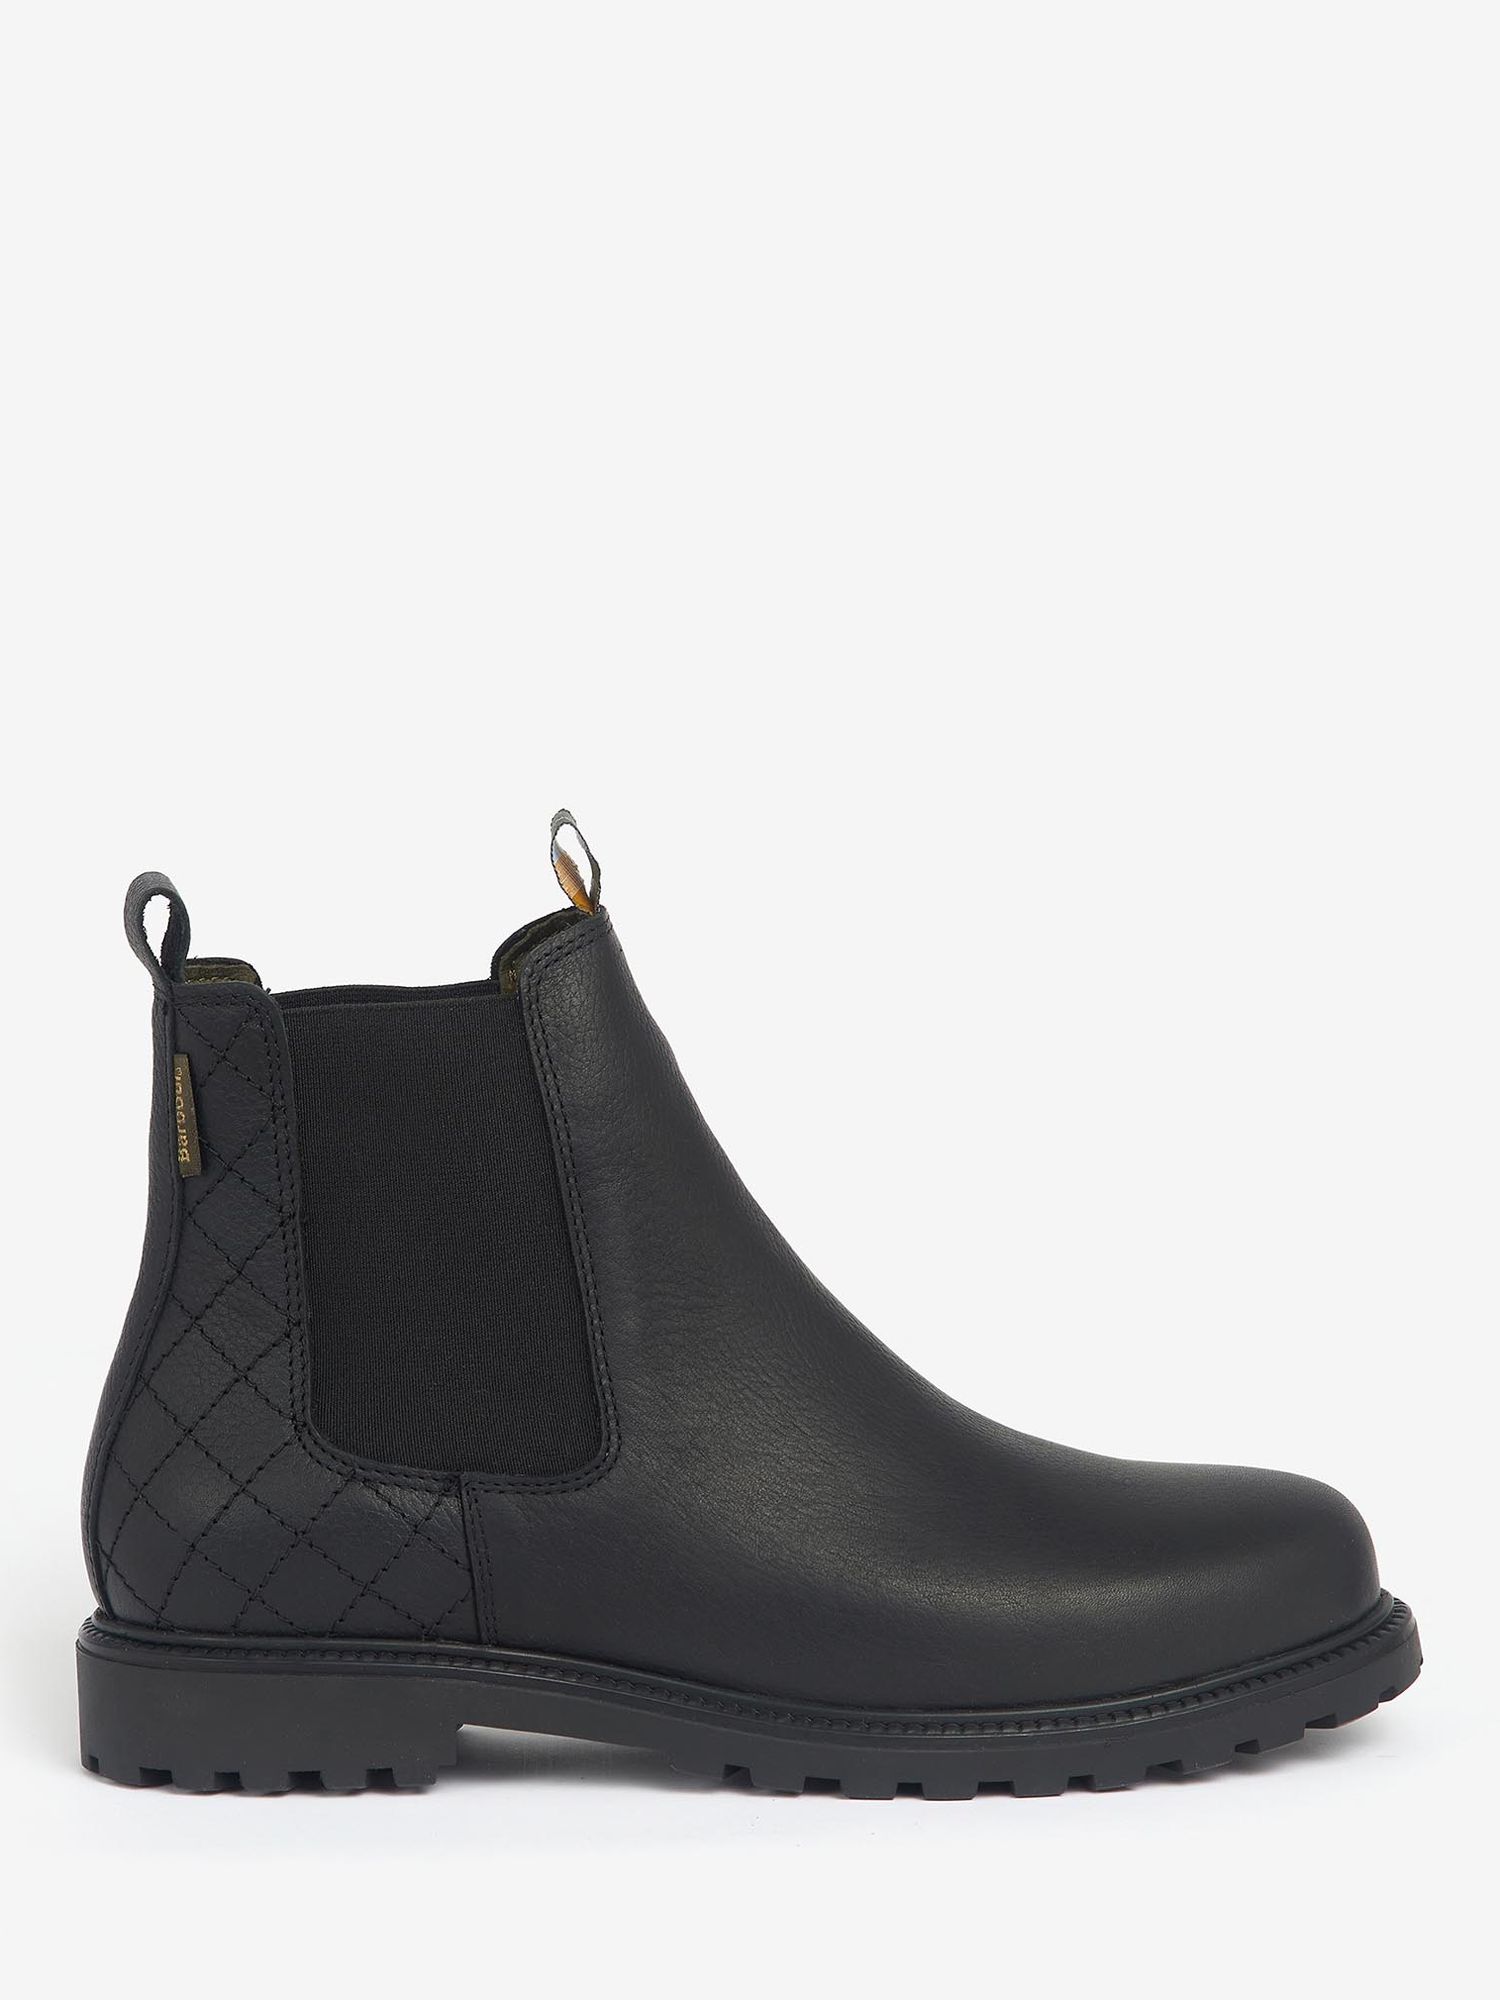 Barbour Kendal Leather Waterproof Chelsea Boots